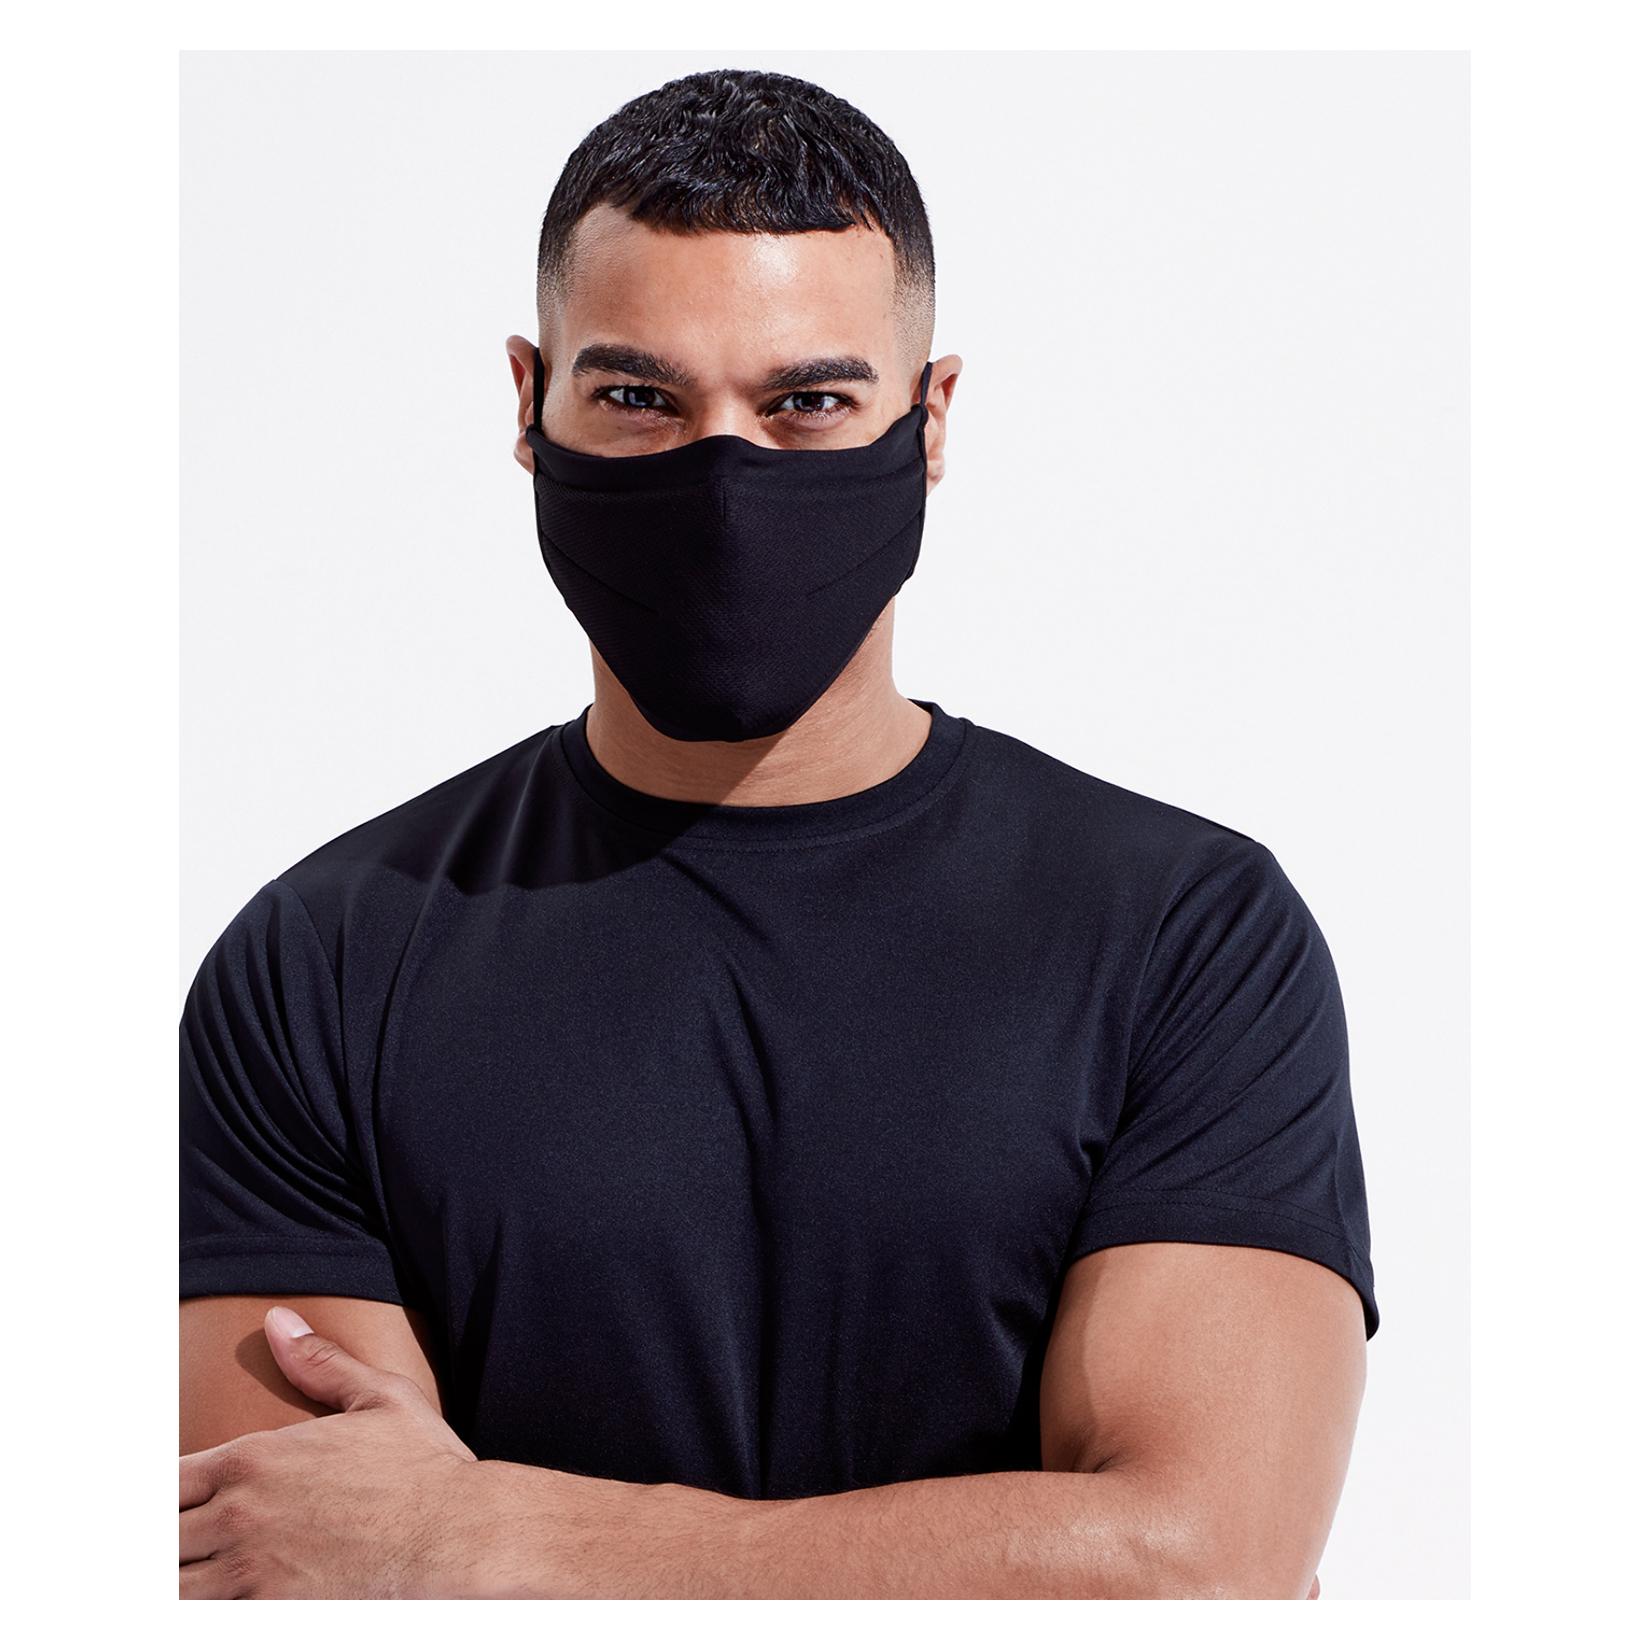 Fitness Mask / Face Covering